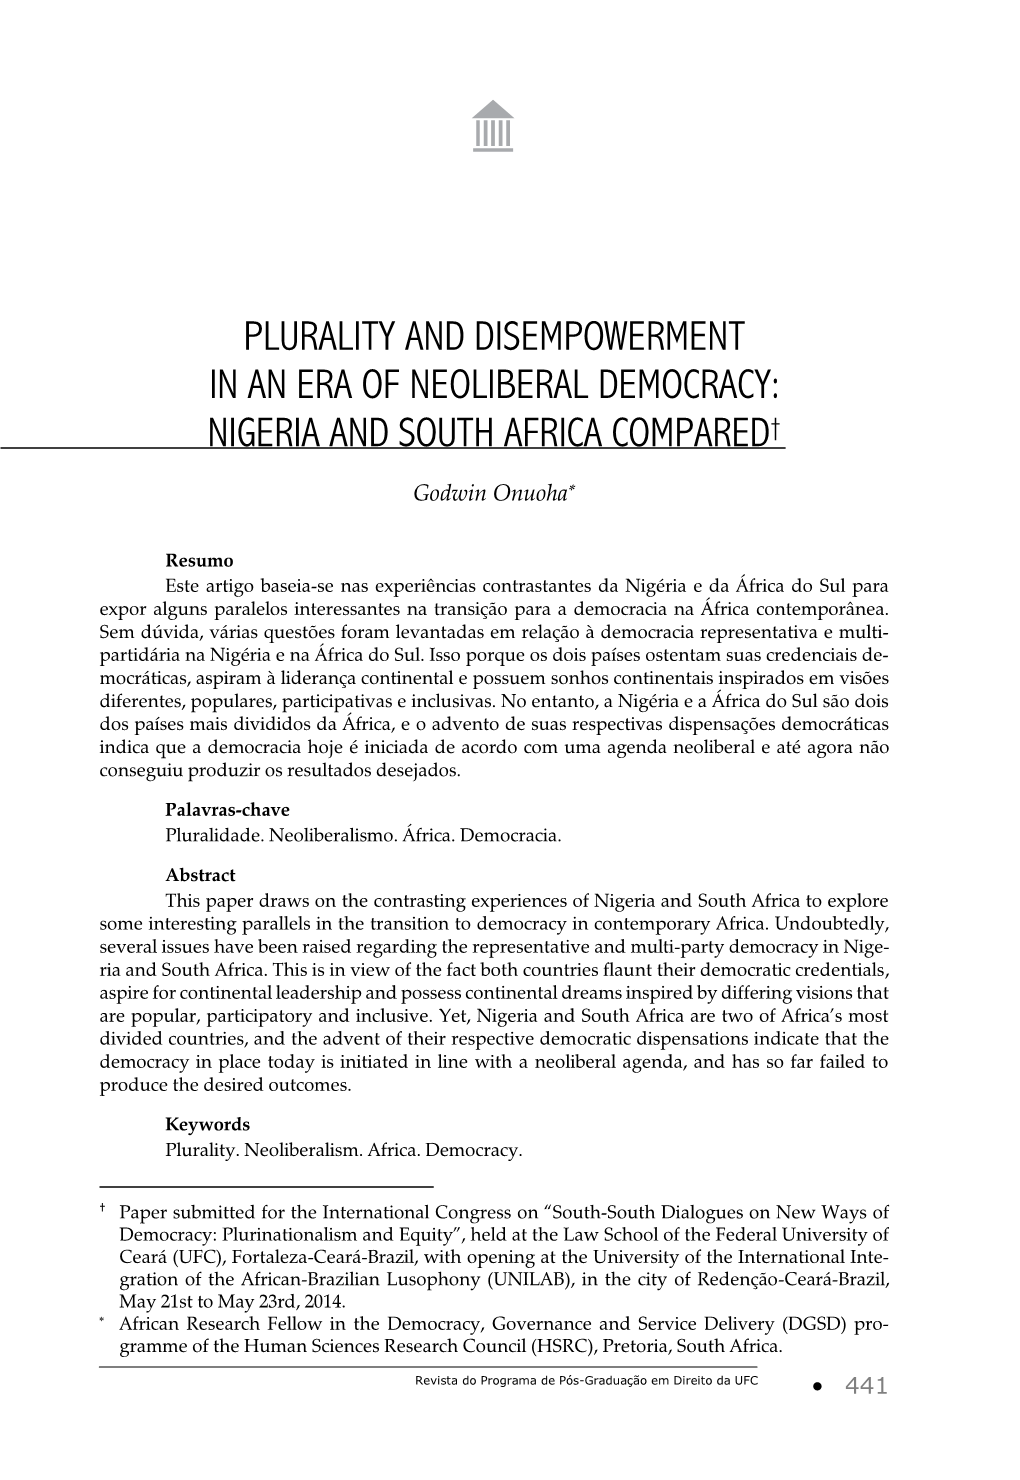 Plurality and Disempowerment in an Era of Neoliberal Democracy: Nigeria and South Africa Compared†